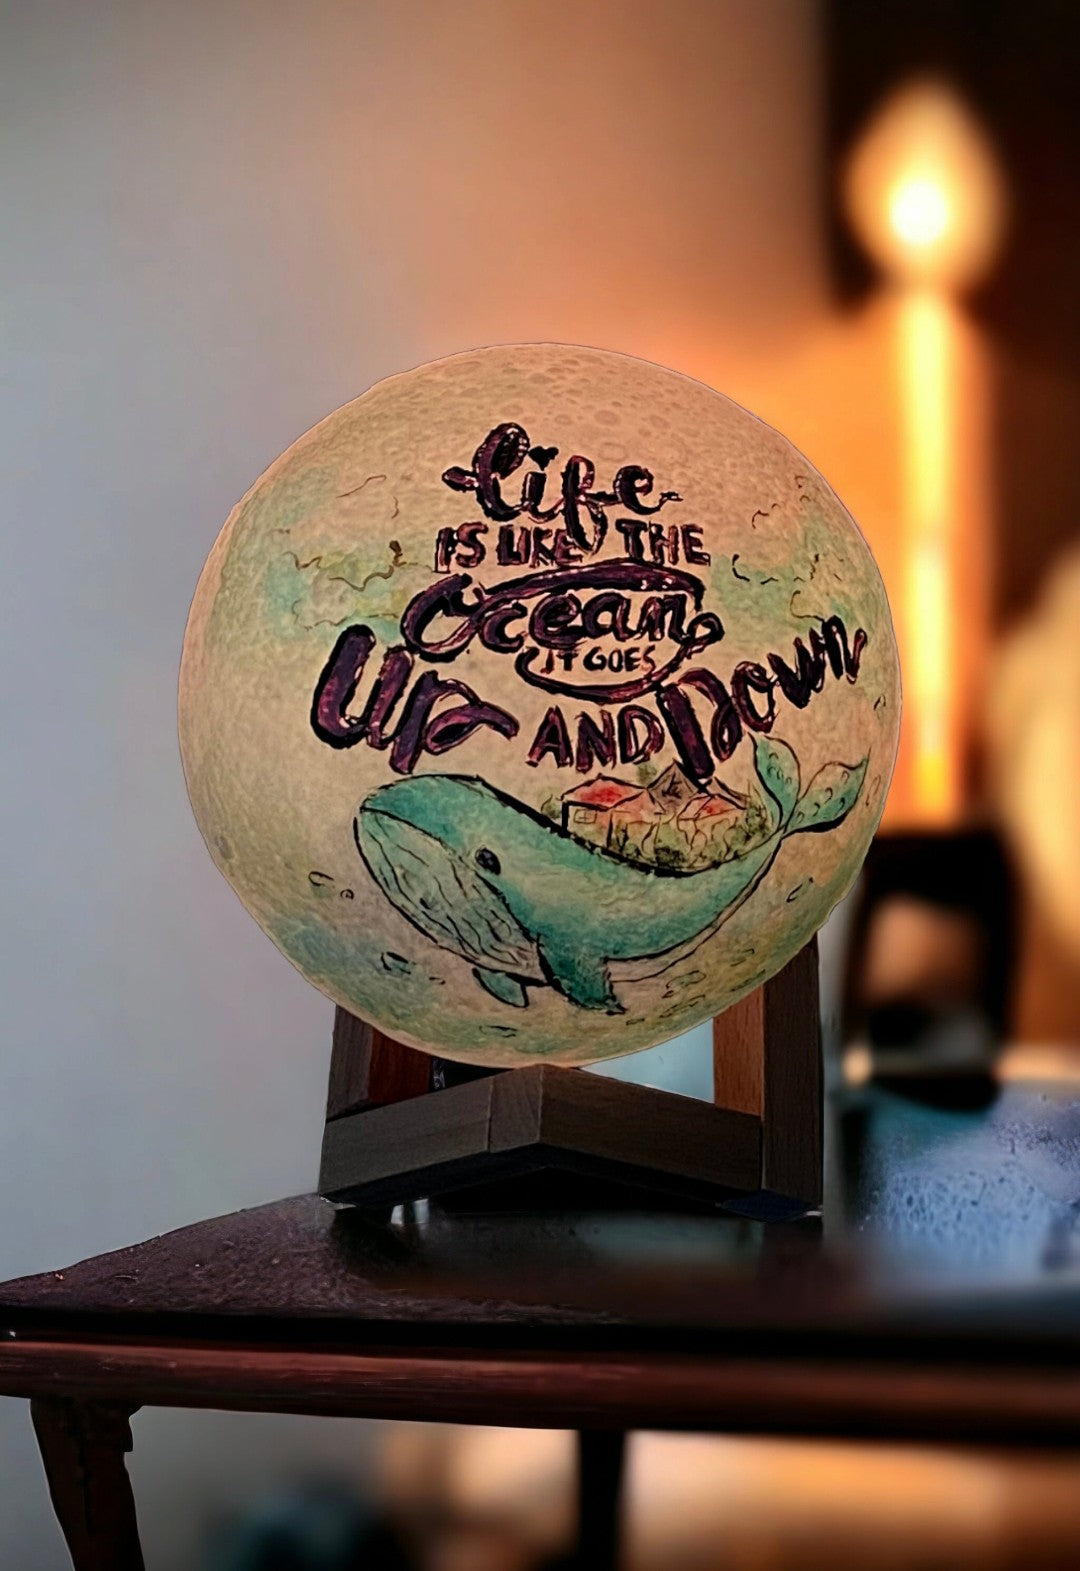 Emerald Blossoms - &quot;Life is like the Ocean, it goes up and down.&quot; hand painted on moon lamp